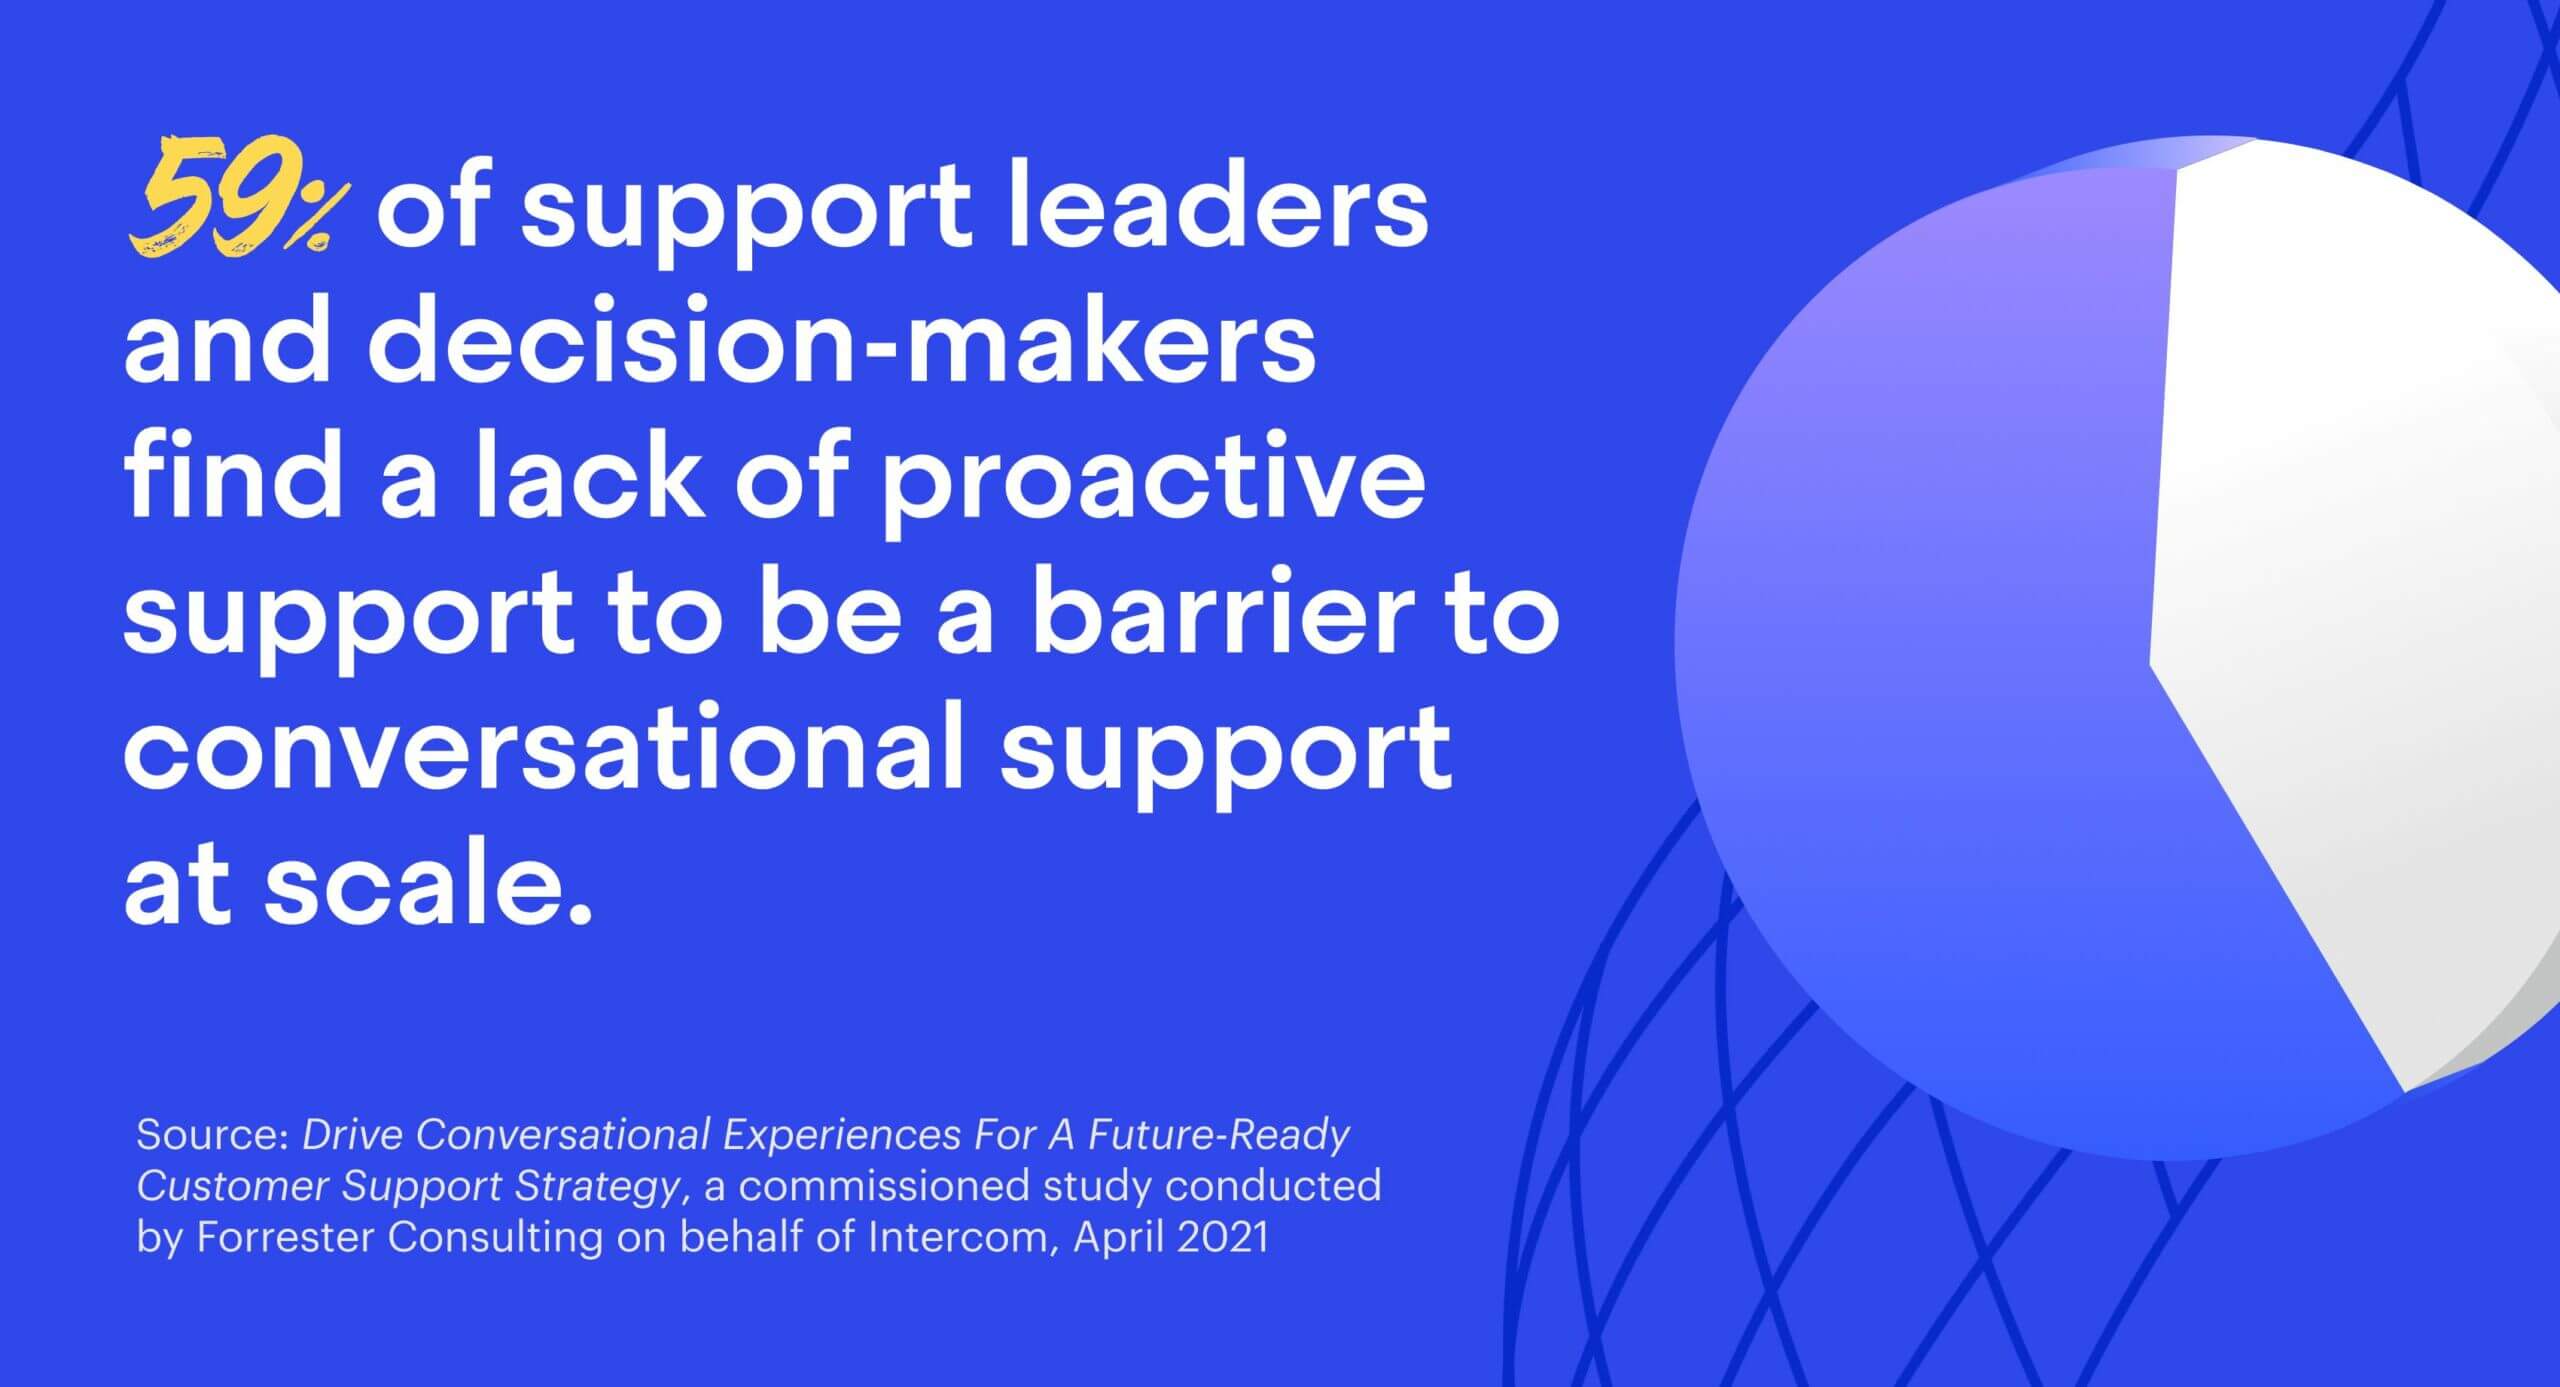 59% of support leaders and decision-makers find a lack of proactive support to be a barrier to conversational support at scale.